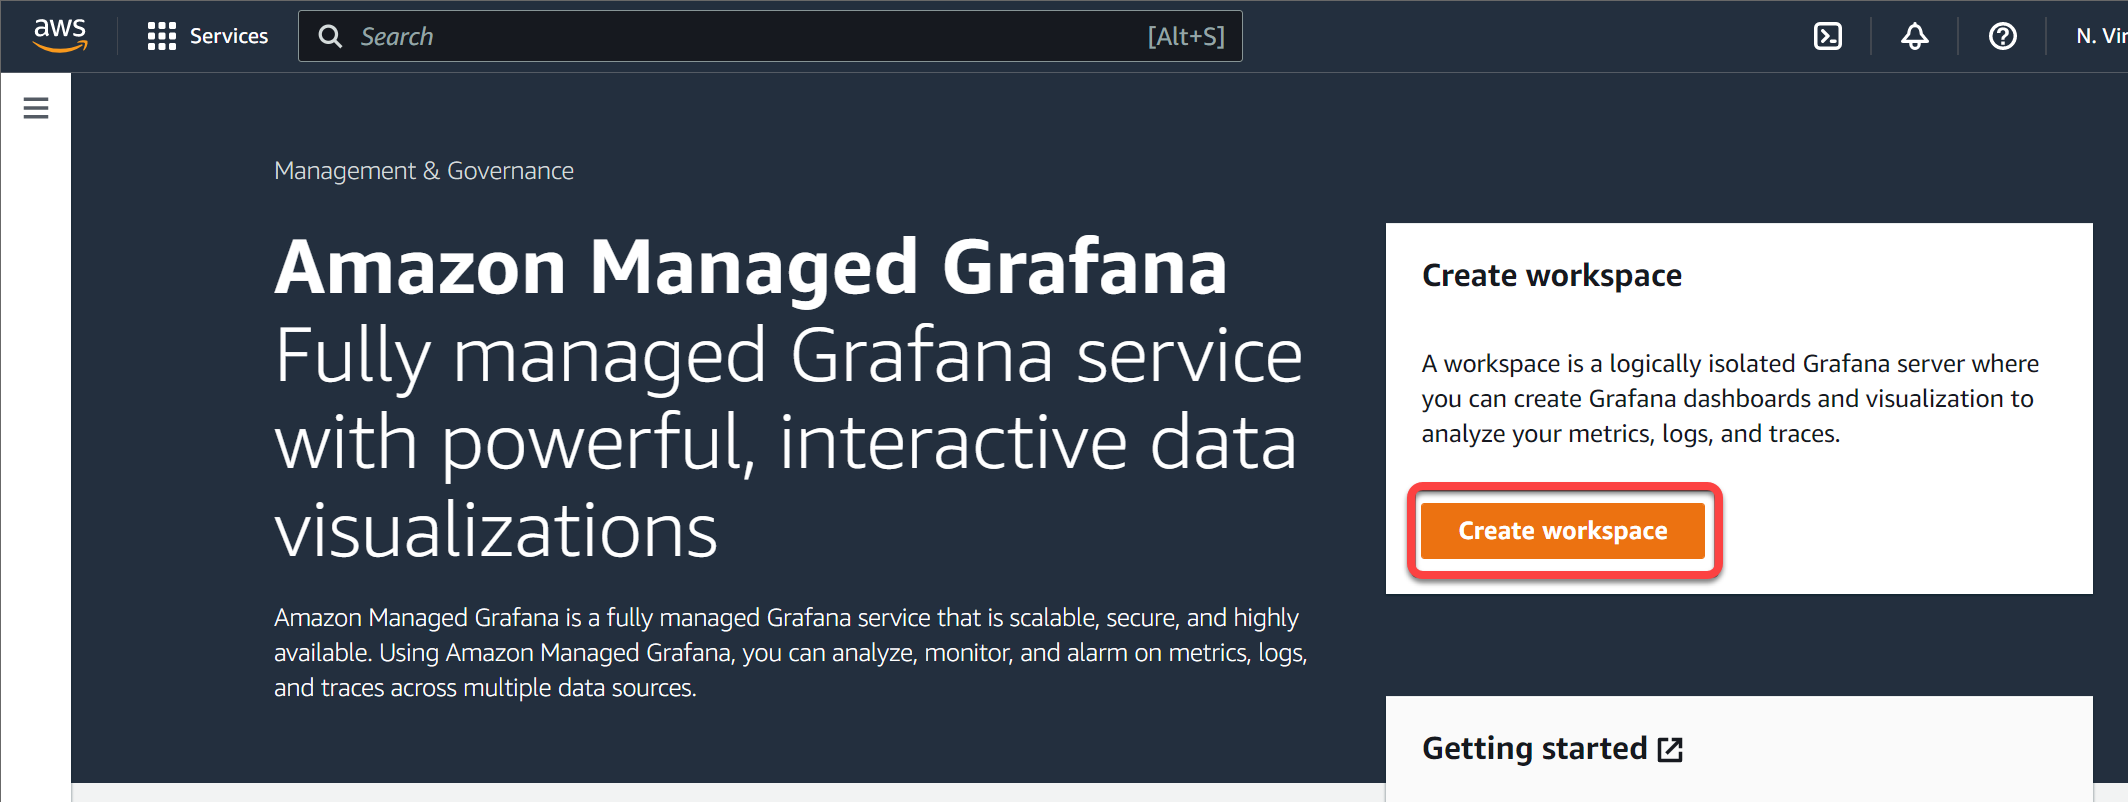 Initiating creating a workspace on AWS Grafana